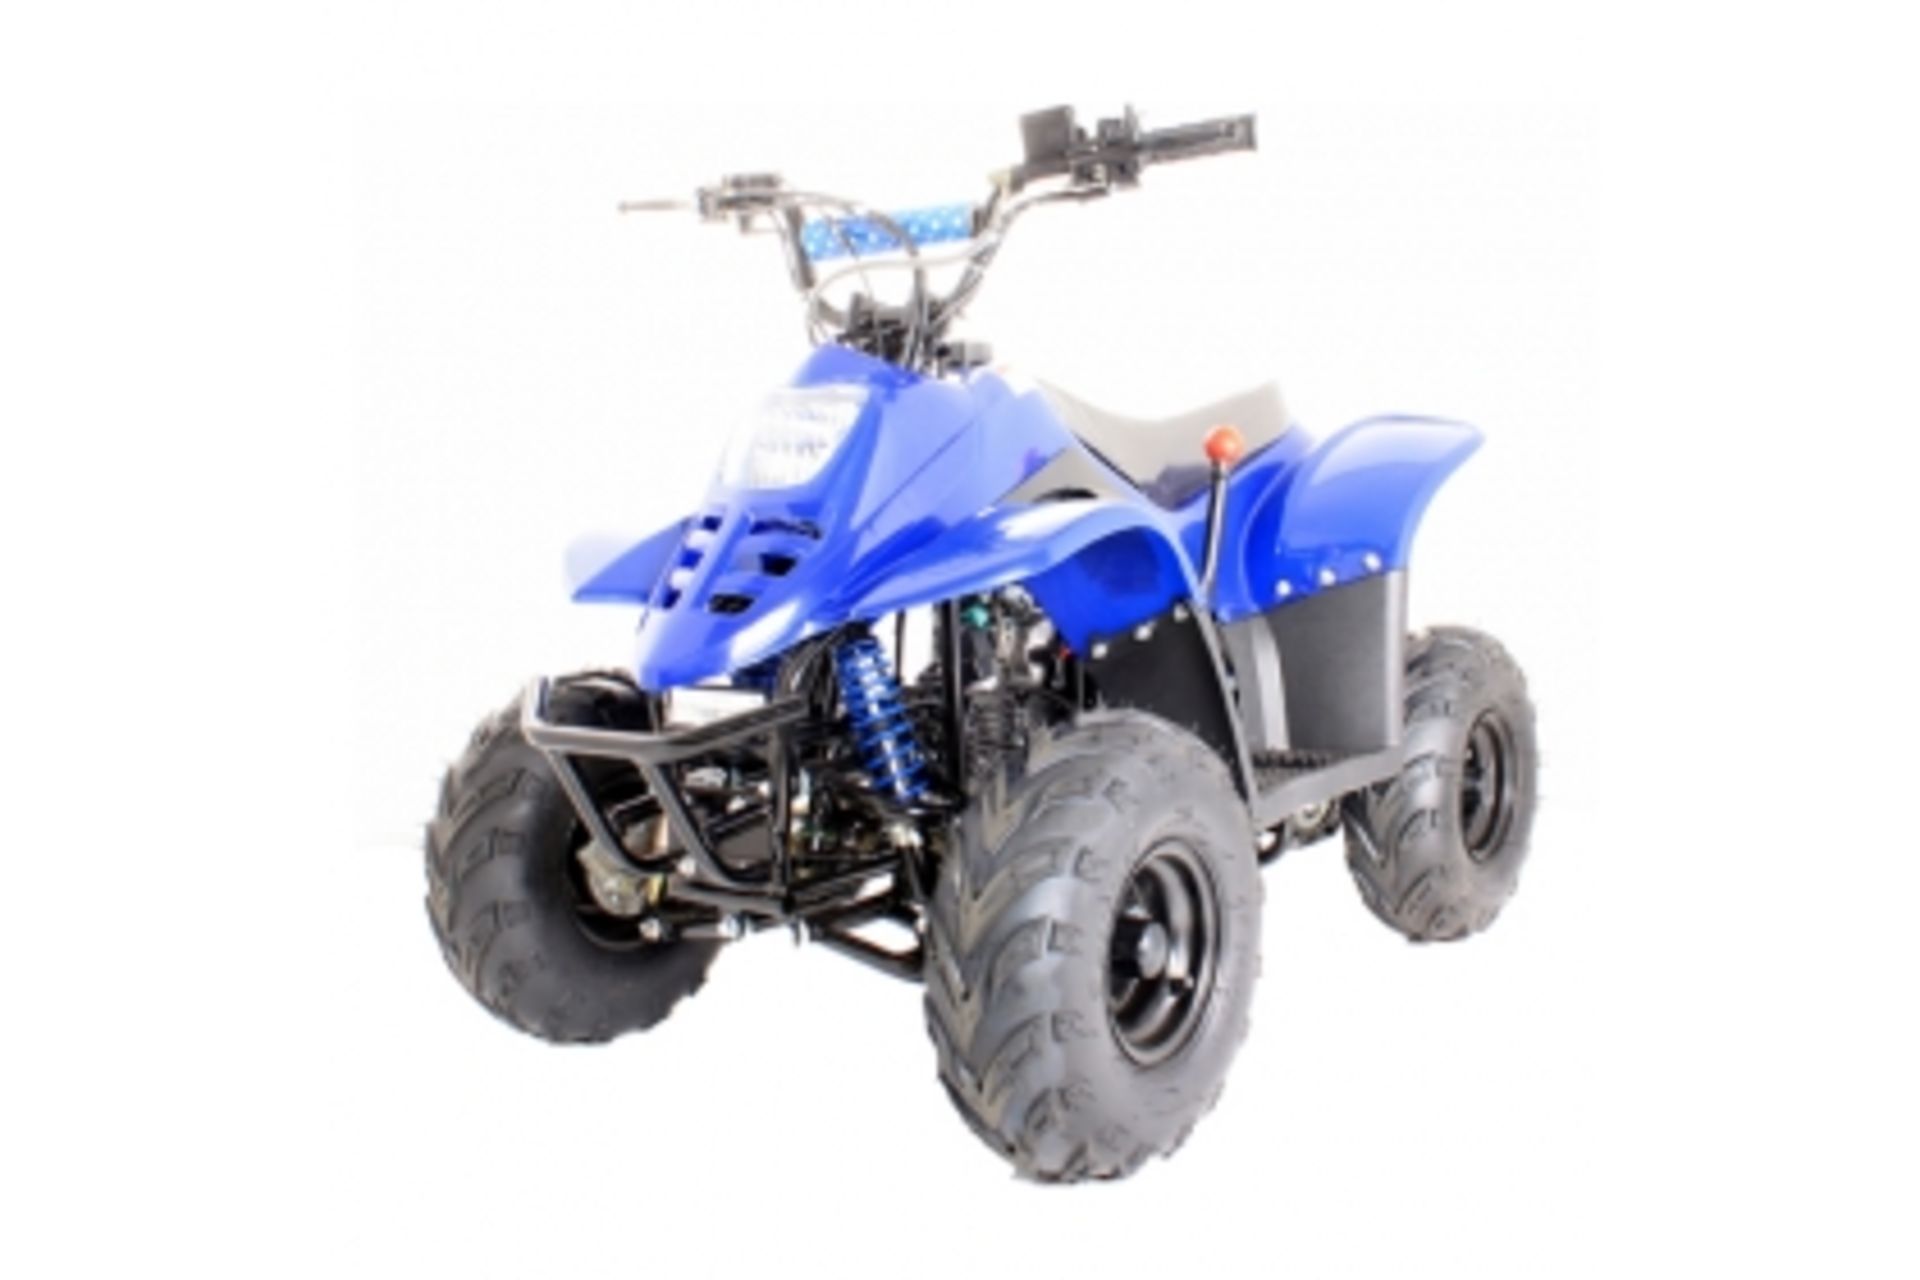 V Brand New 110cc Thunder Cat Quad Bike with Electric Start and Reverse Gear - Lights Front and Back